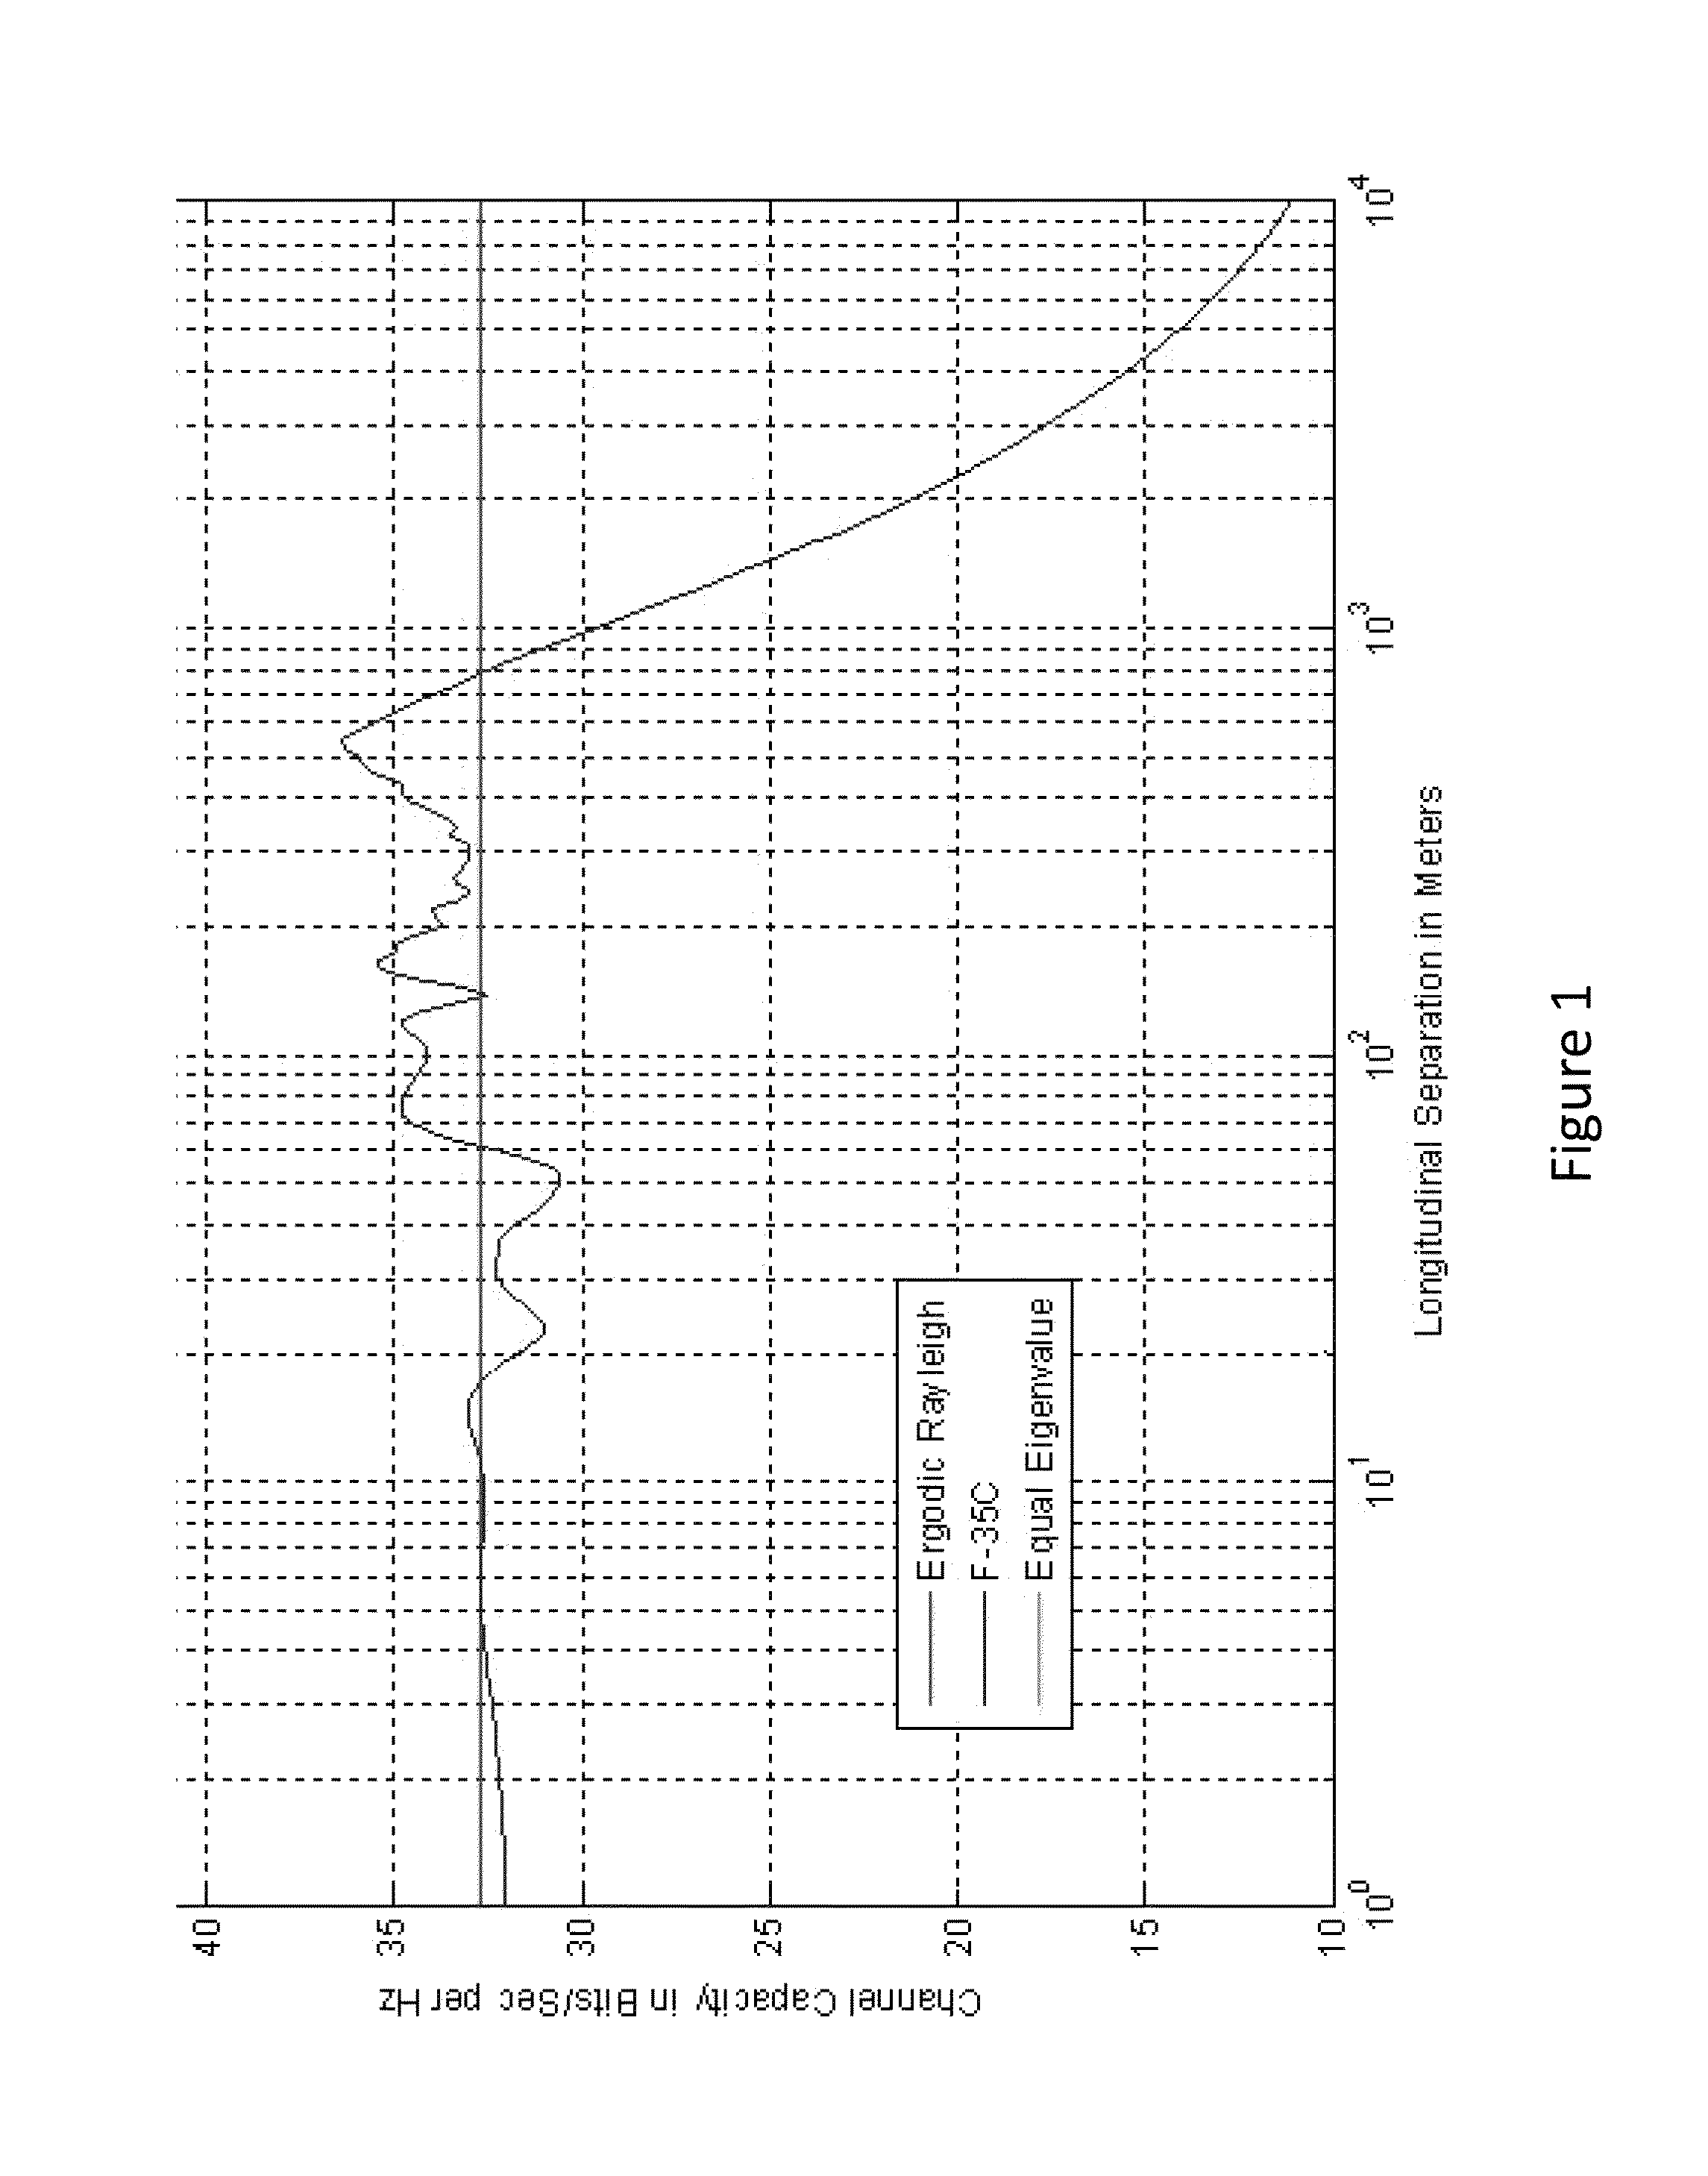 System for airborne communications